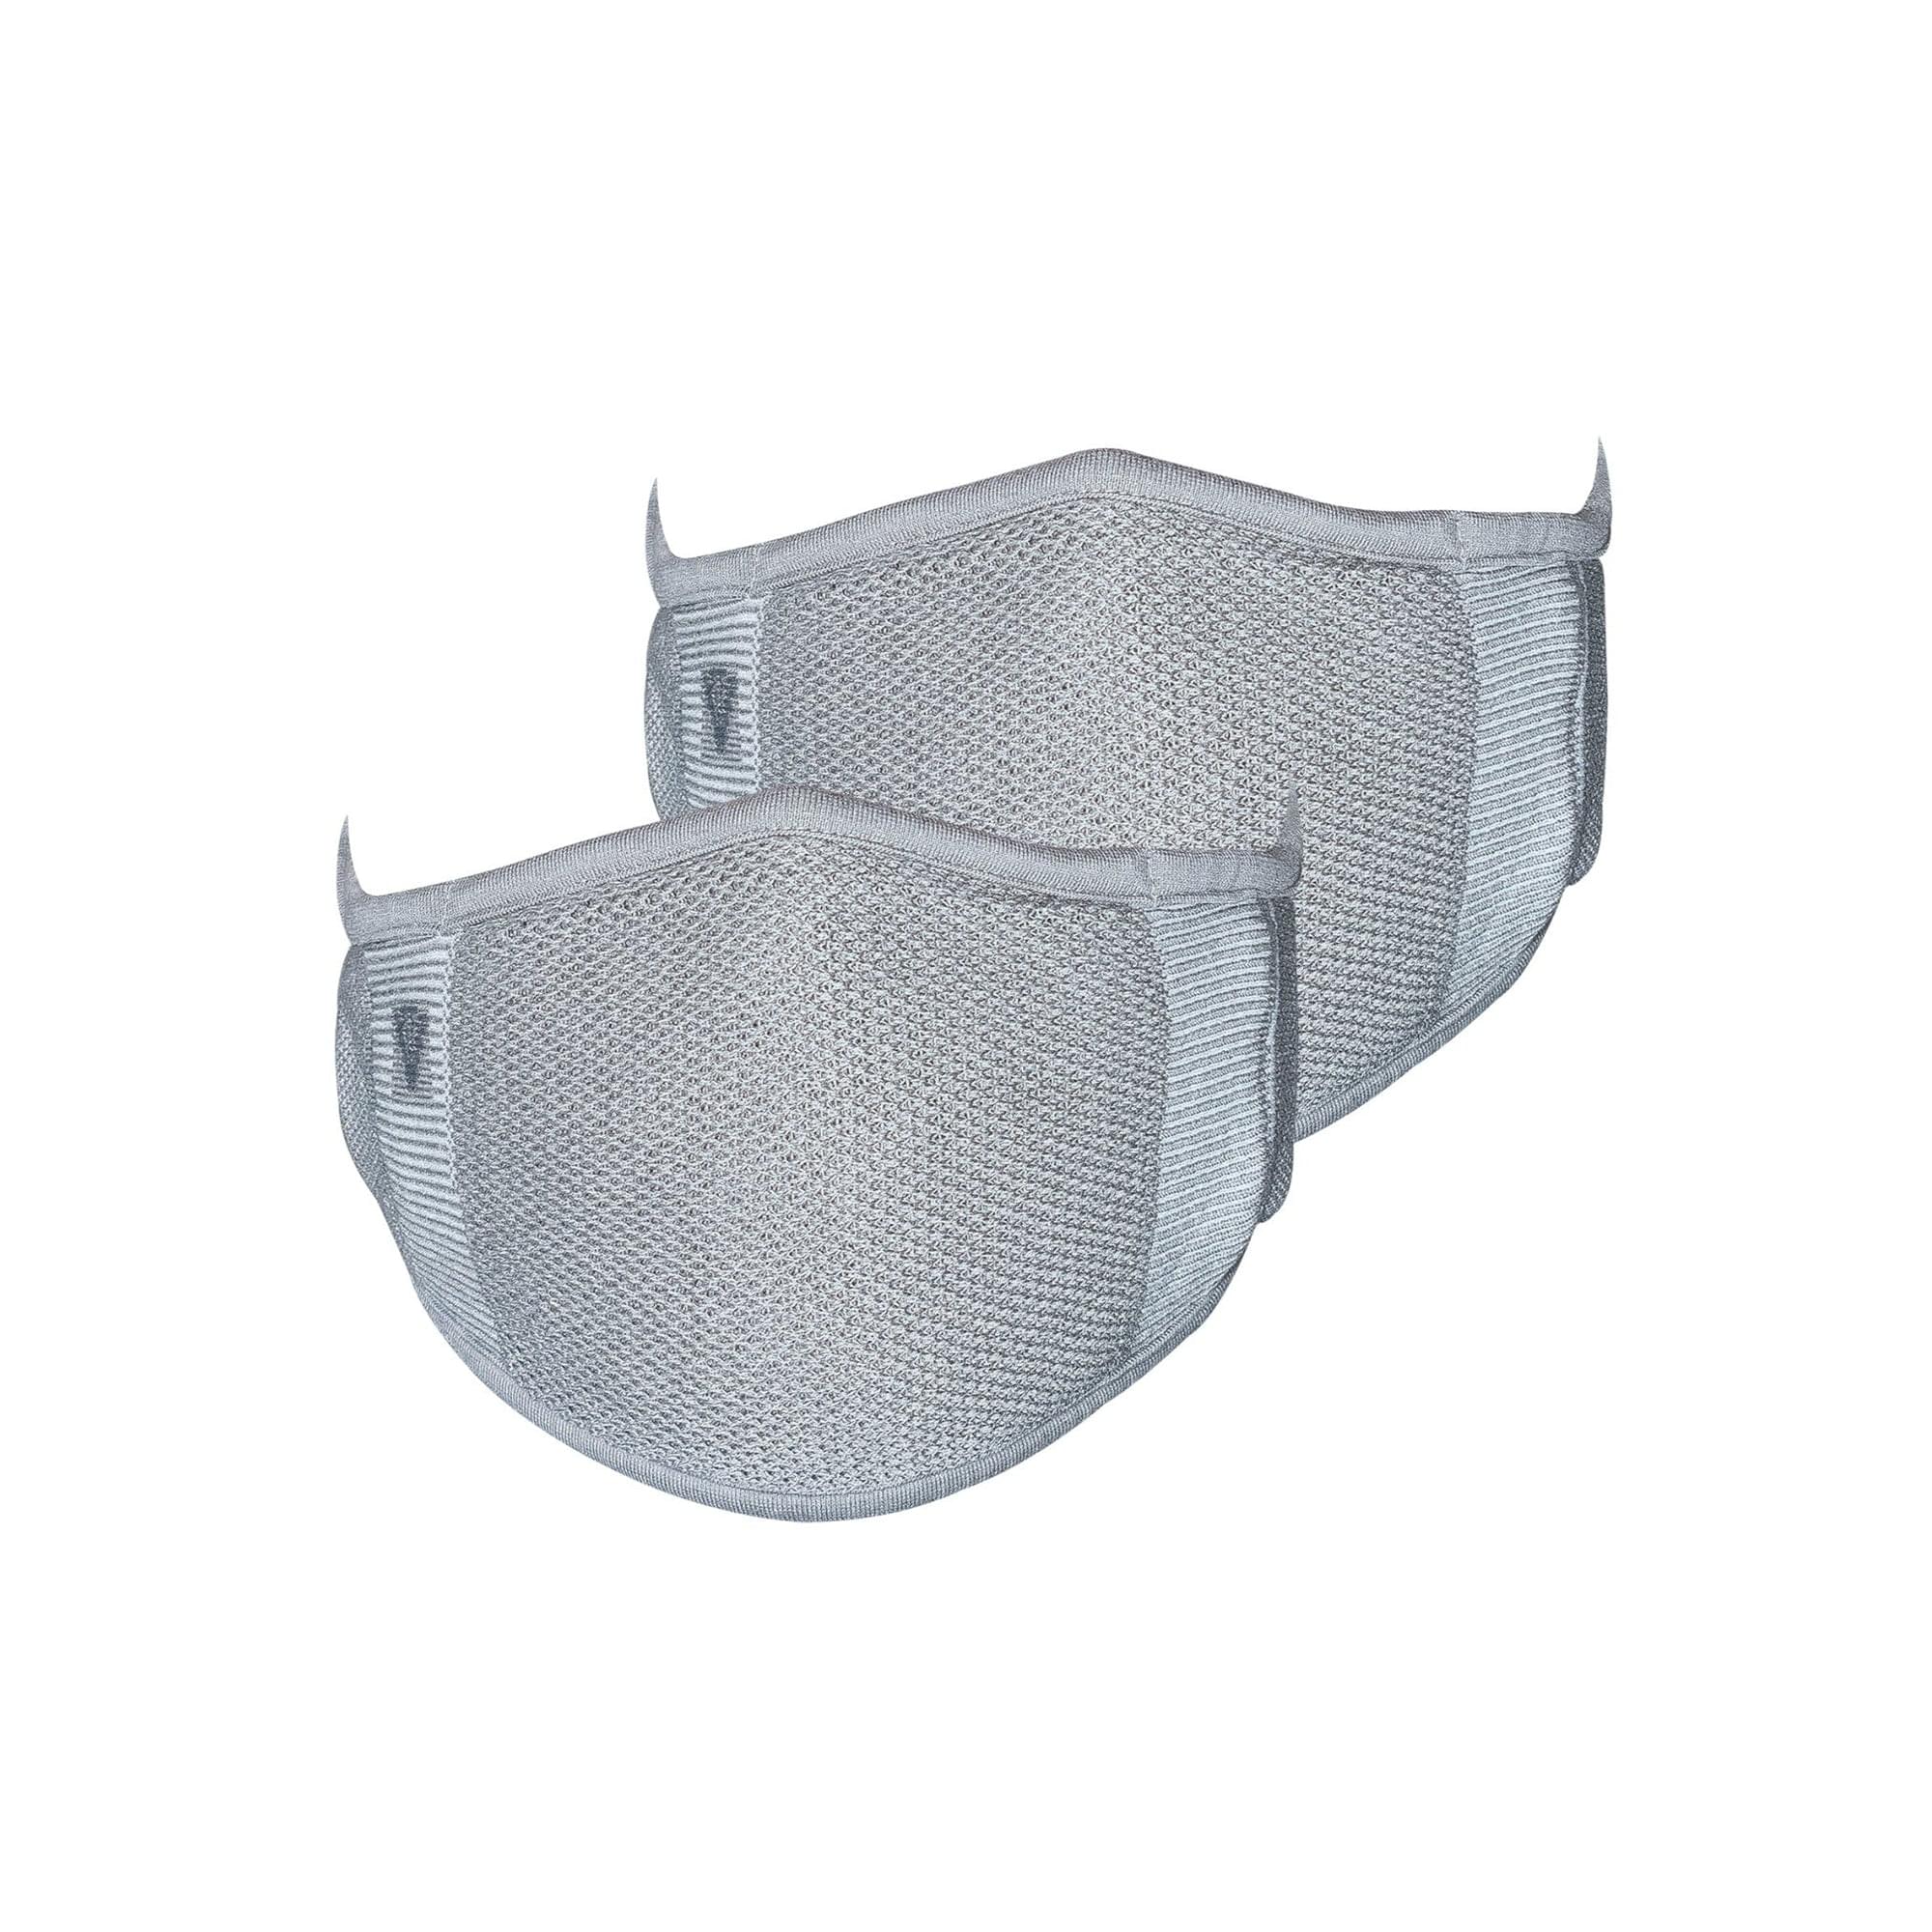 2-Layer Antibacterial Protection Mask for Adults (Unisex) - Pack of 2